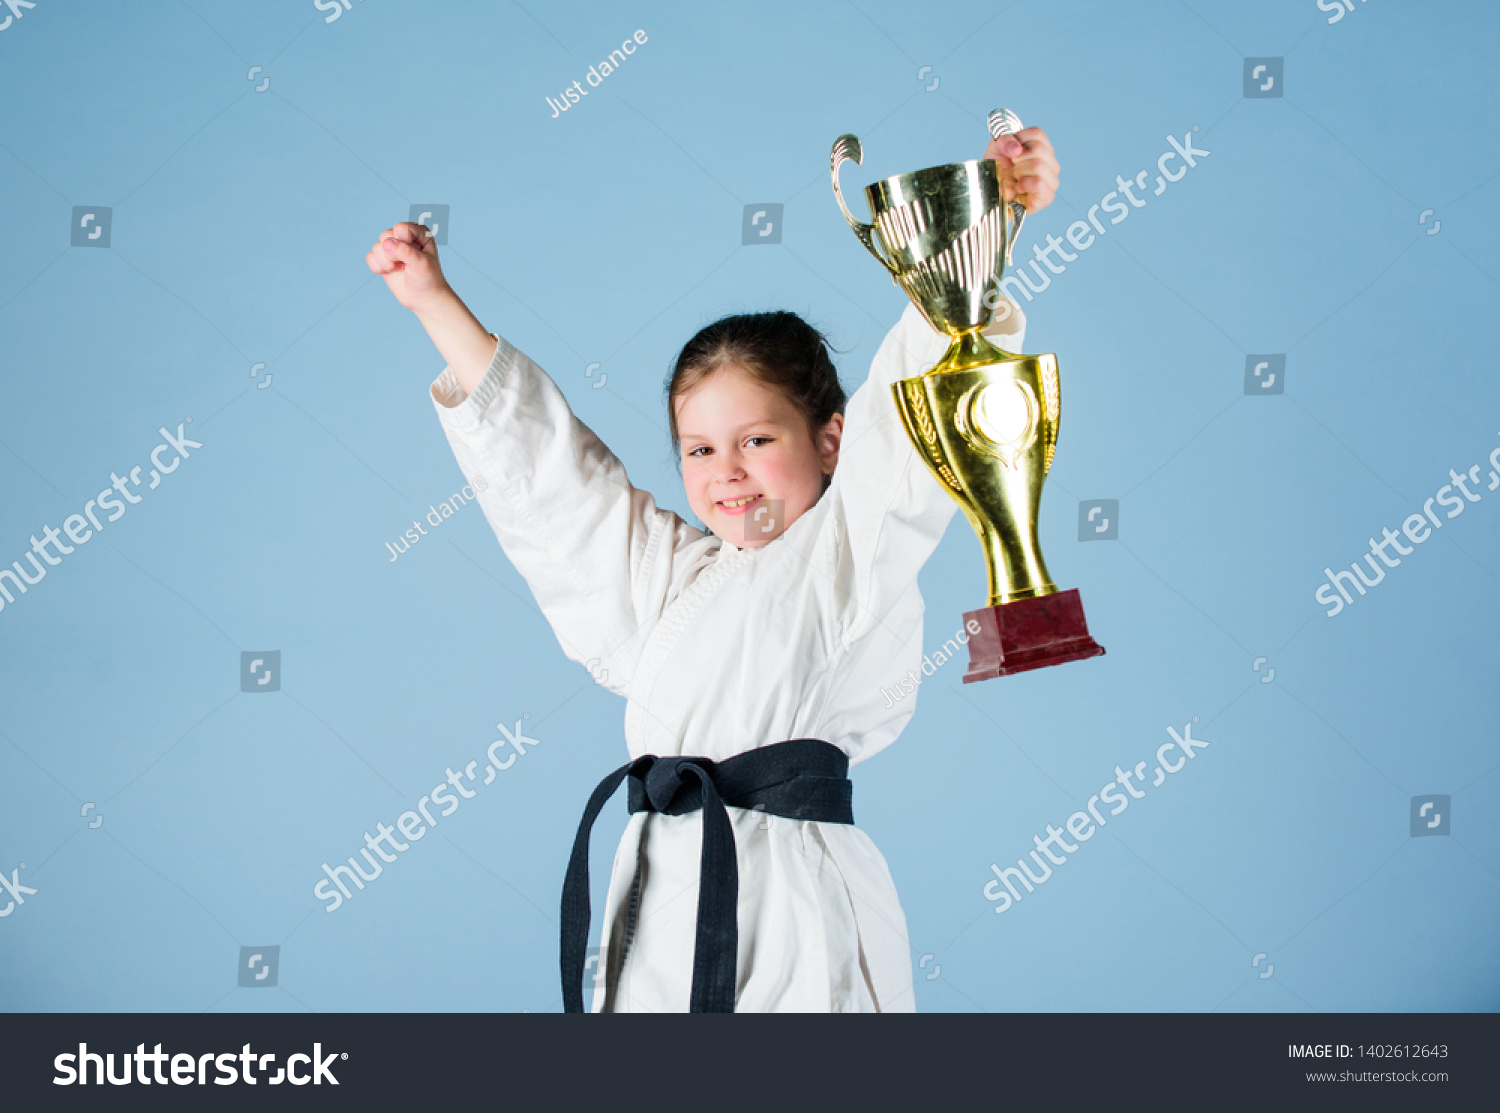 Karate fighter child. Karate sport concept. Self defence skills. Karate gives feeling of confidence. Strong and confident small kid. Victory and win. Girl little child in white kimono with belt. #1402612643